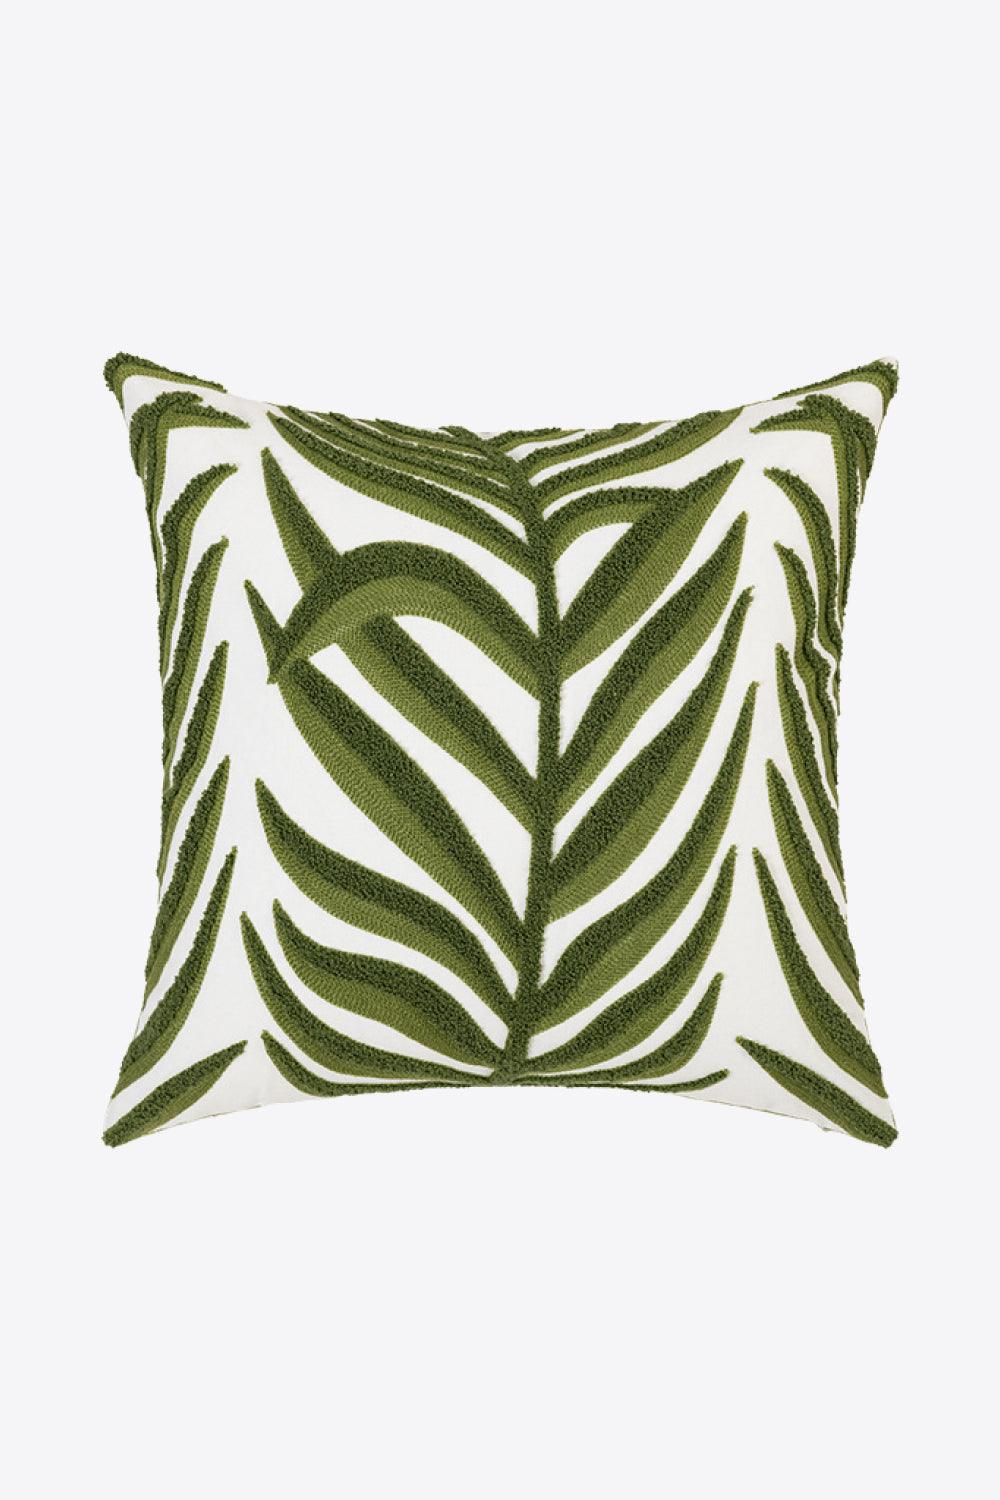 Embroidered Square Decorative Throw Pillow Case - Closet of Ren